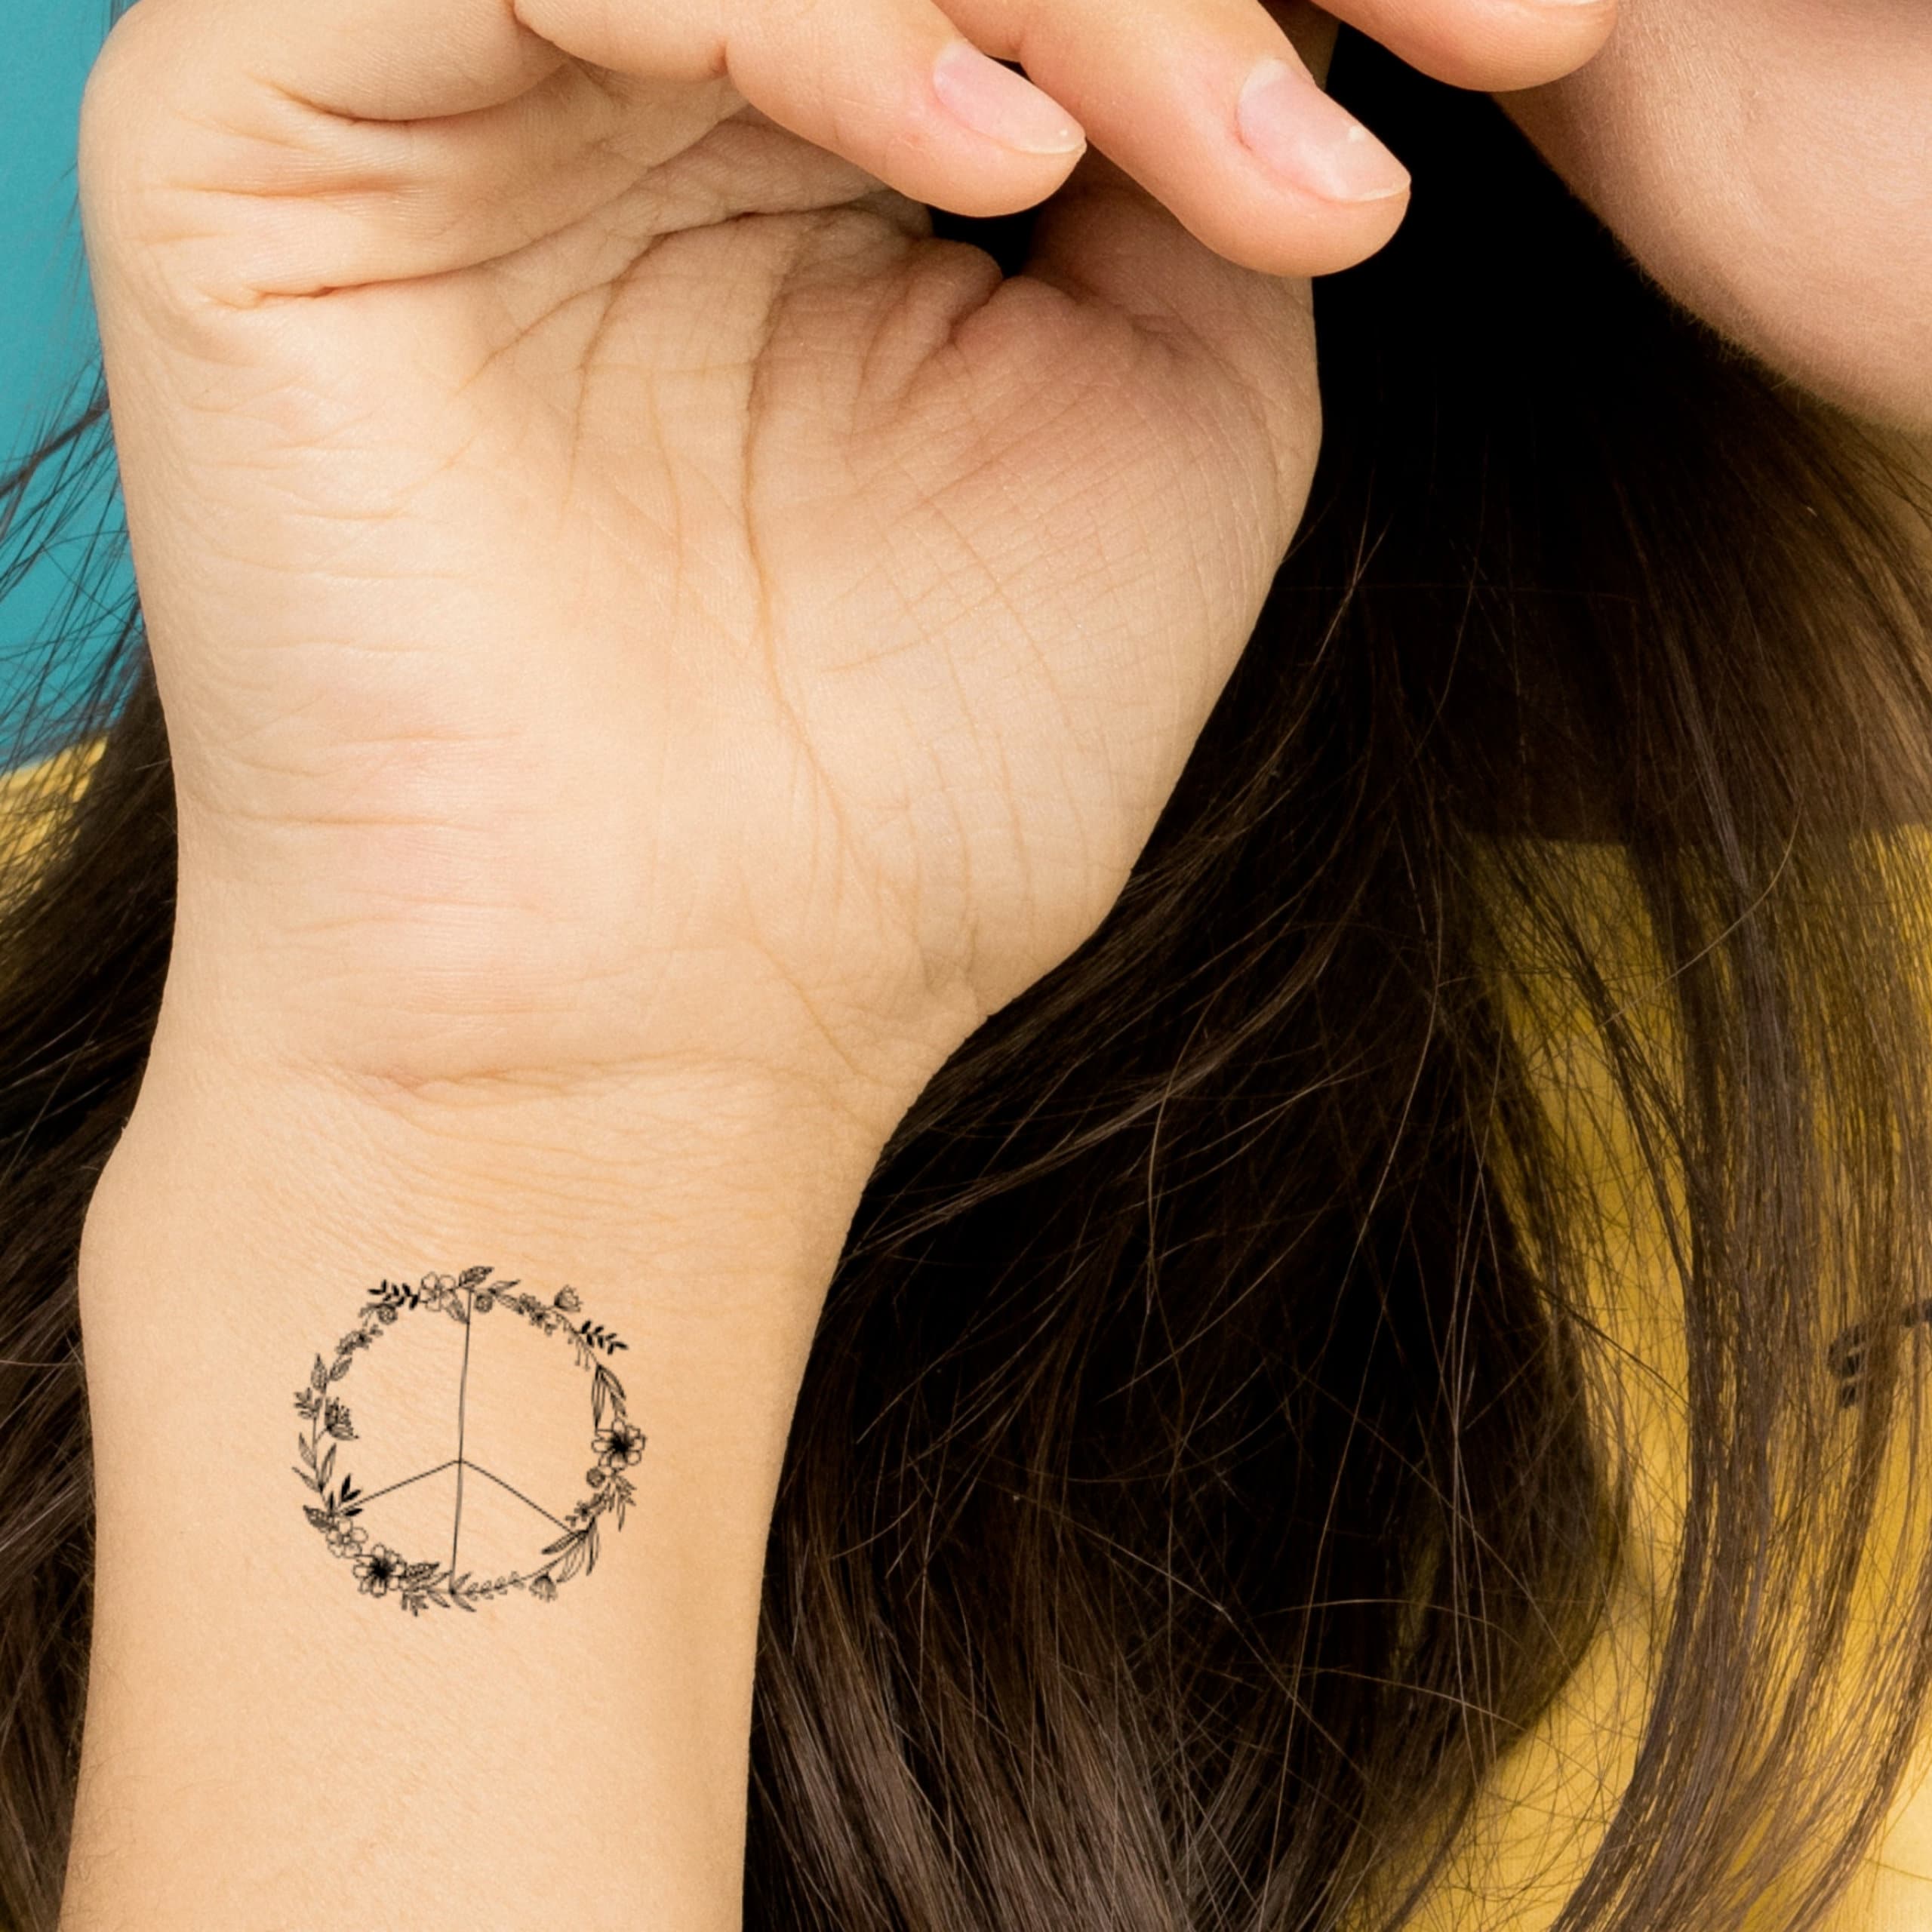 Yin Yang Tattoos Represent BalanceHere Are 20 Looks to Consider